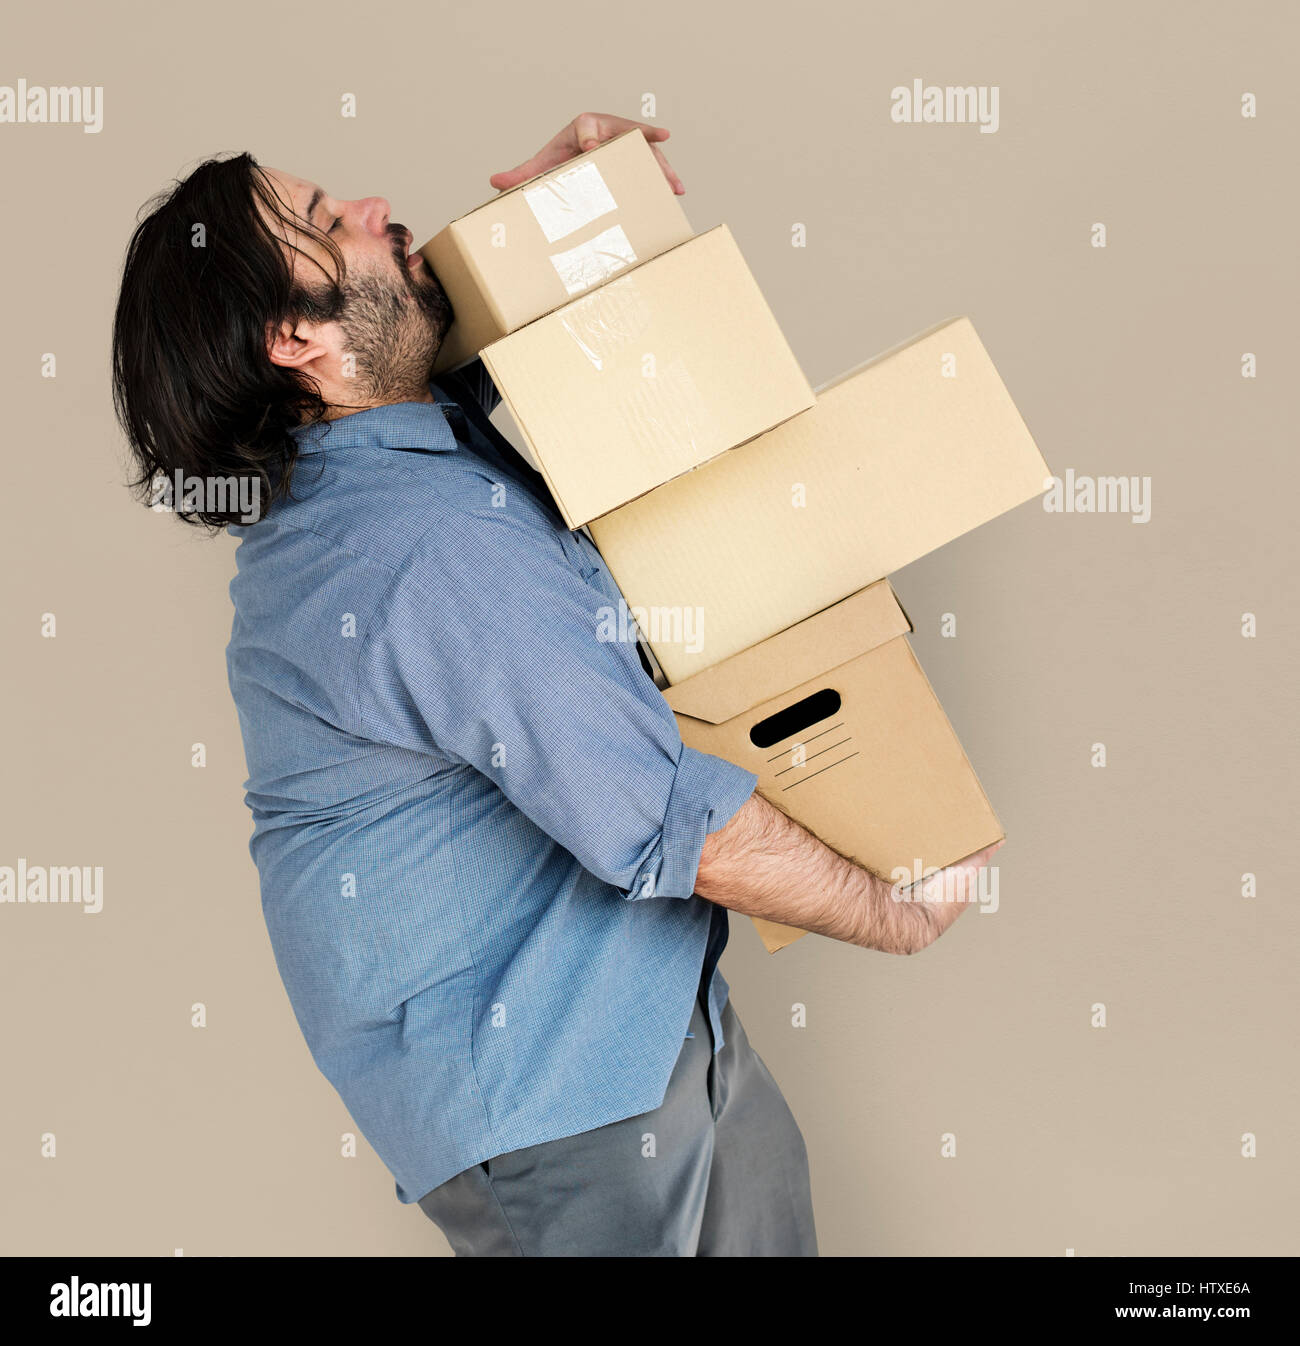 Man Carrying Box Parcel Package Overload Stock Photo